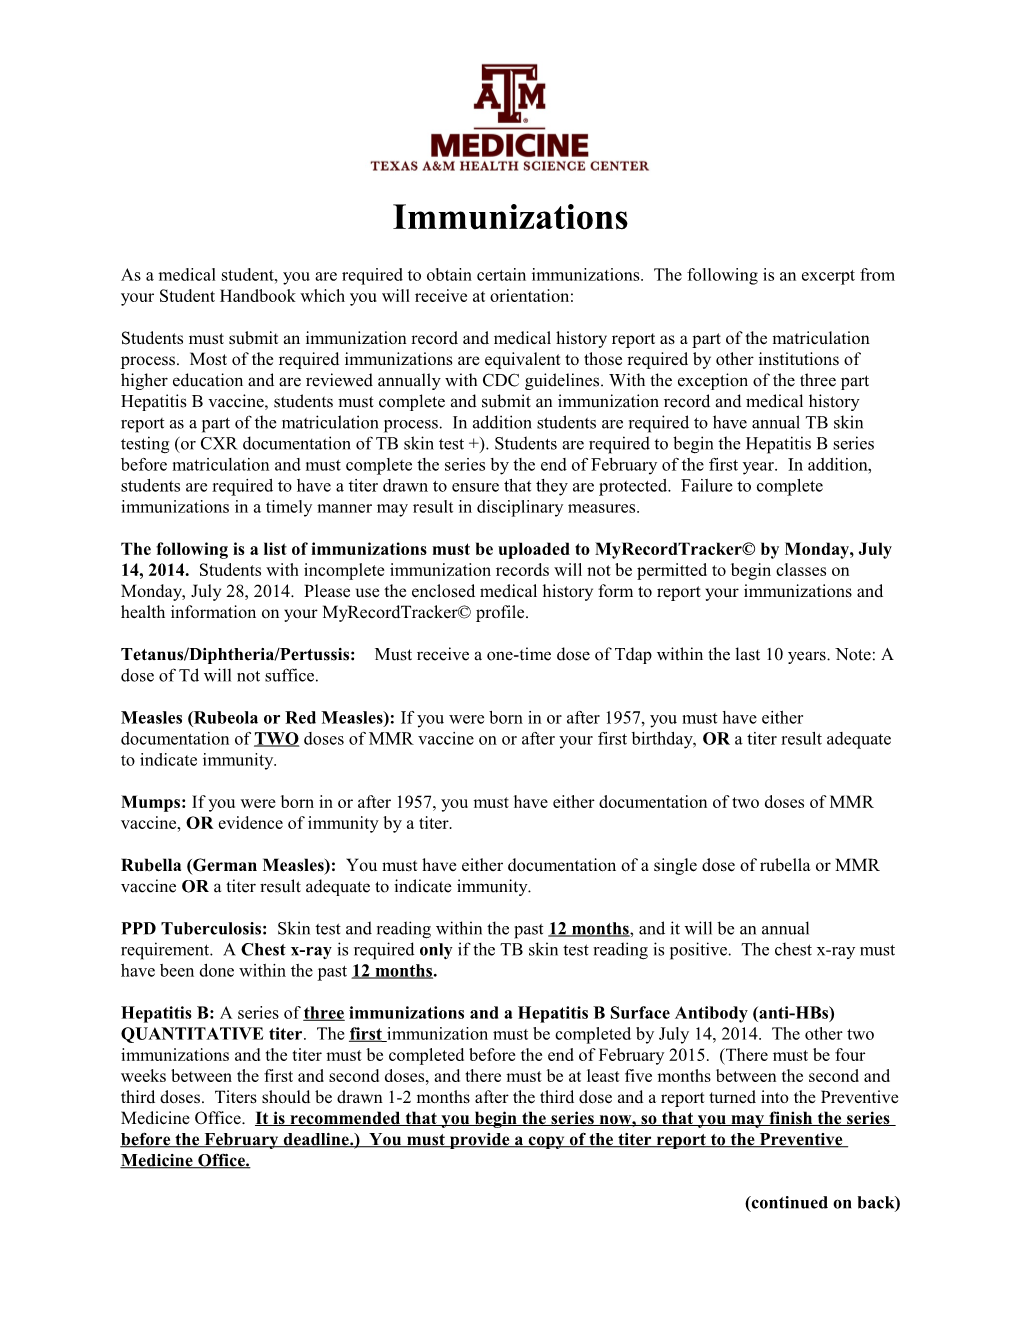 As a Medical Student, You Are Required to Obtain Certain Immunizations. the Following Is